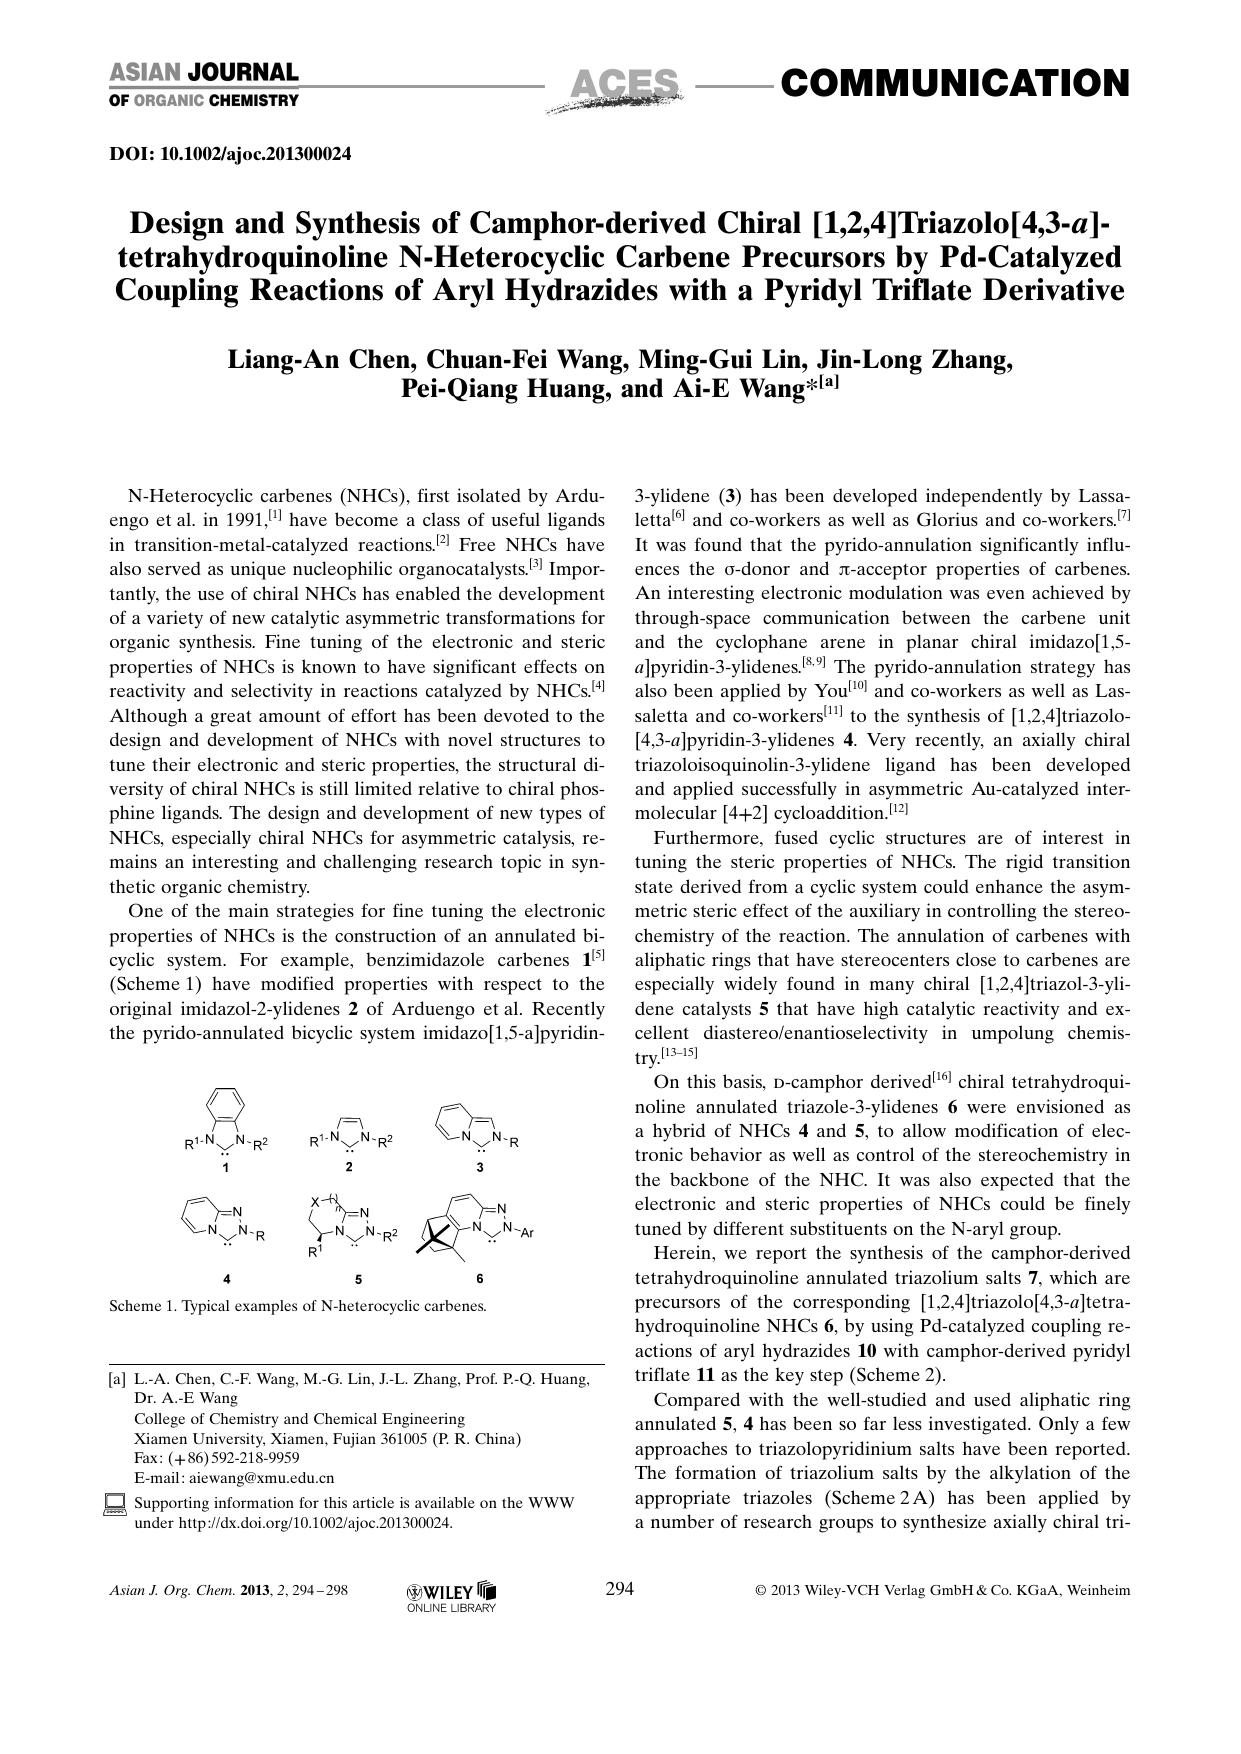 Design and Synthesis of Camphorderived Chiral [1,2,4]Triazolo[4,3a]tetrahydroquinoline NHeterocyclic Carbene Precursors by PdCatalyzed Coupling Reactions of Aryl Hydrazides with a by Unknown